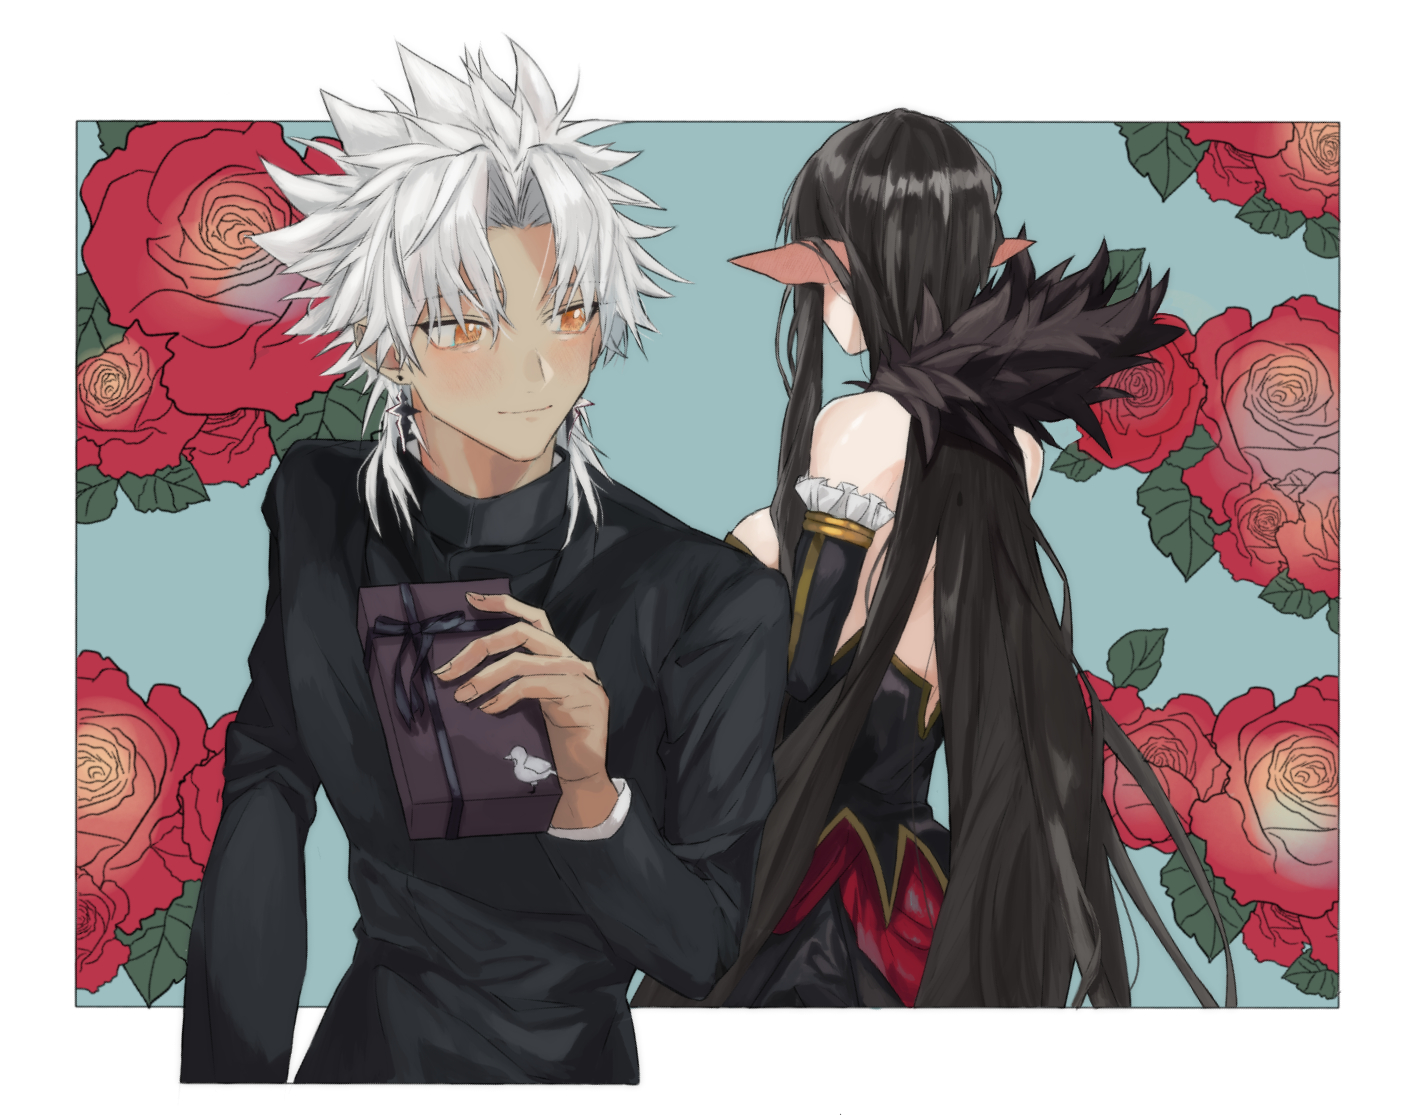 Fate Series FGO Fate Apocrypha Couple Anime Boys Anime Girls Pointed Ears 2D Anime Bare Shoulders Bl 1404x1115